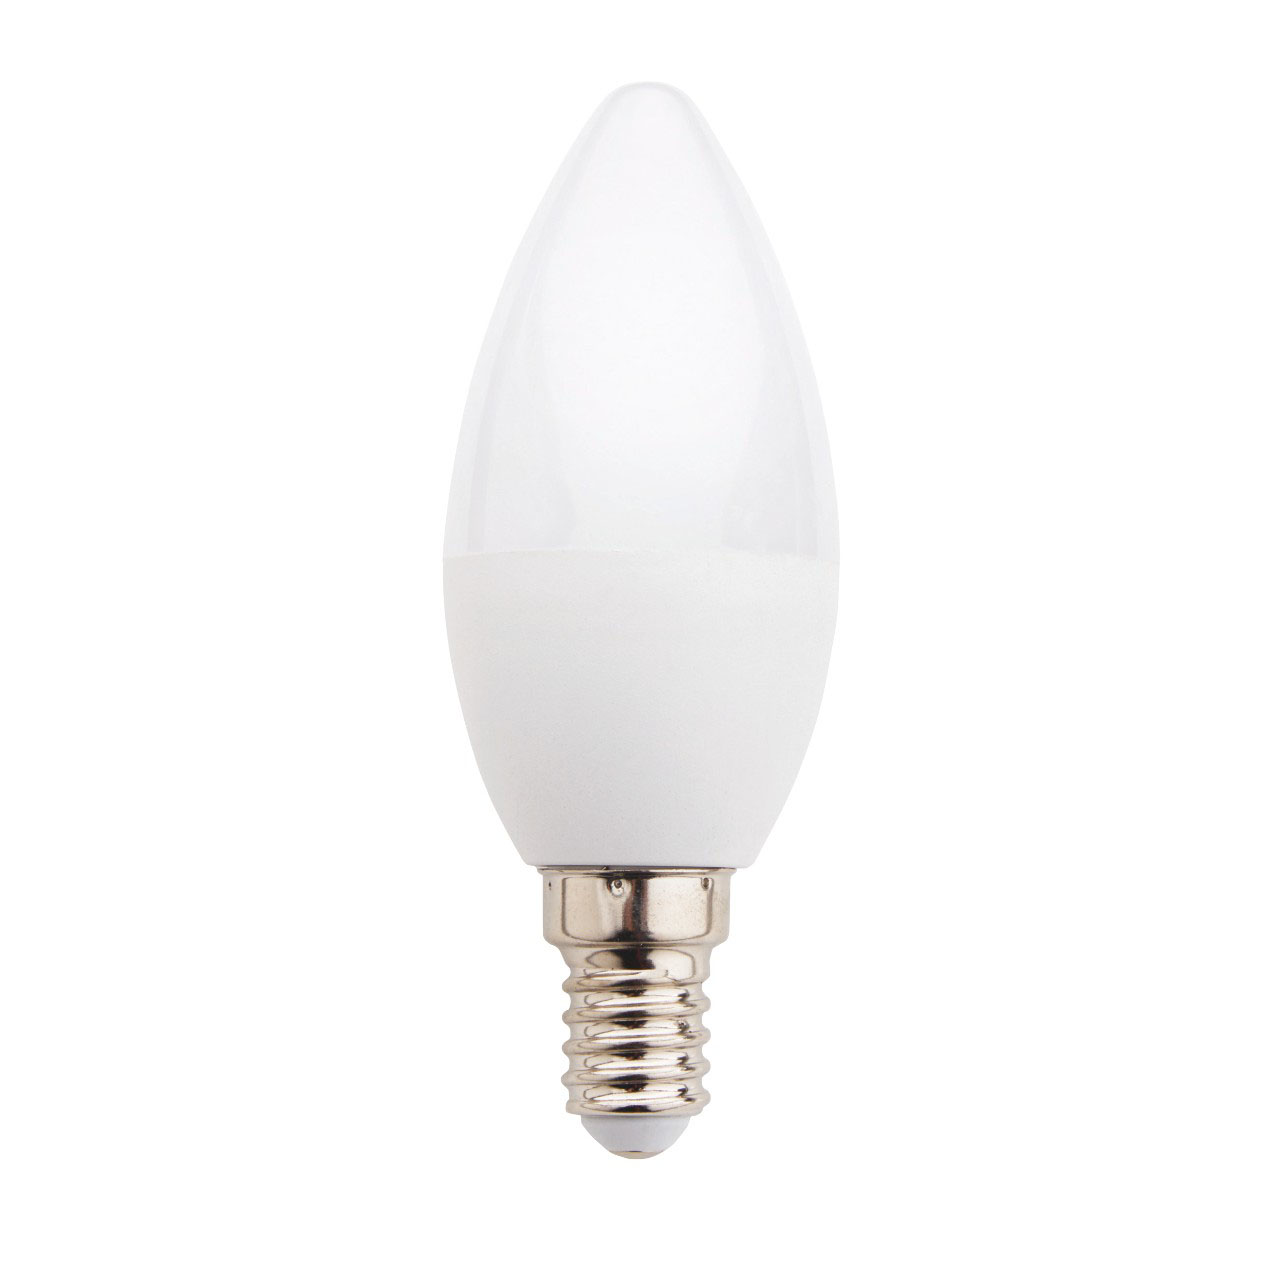 LED Candle Light Bulbs - Pack of 4